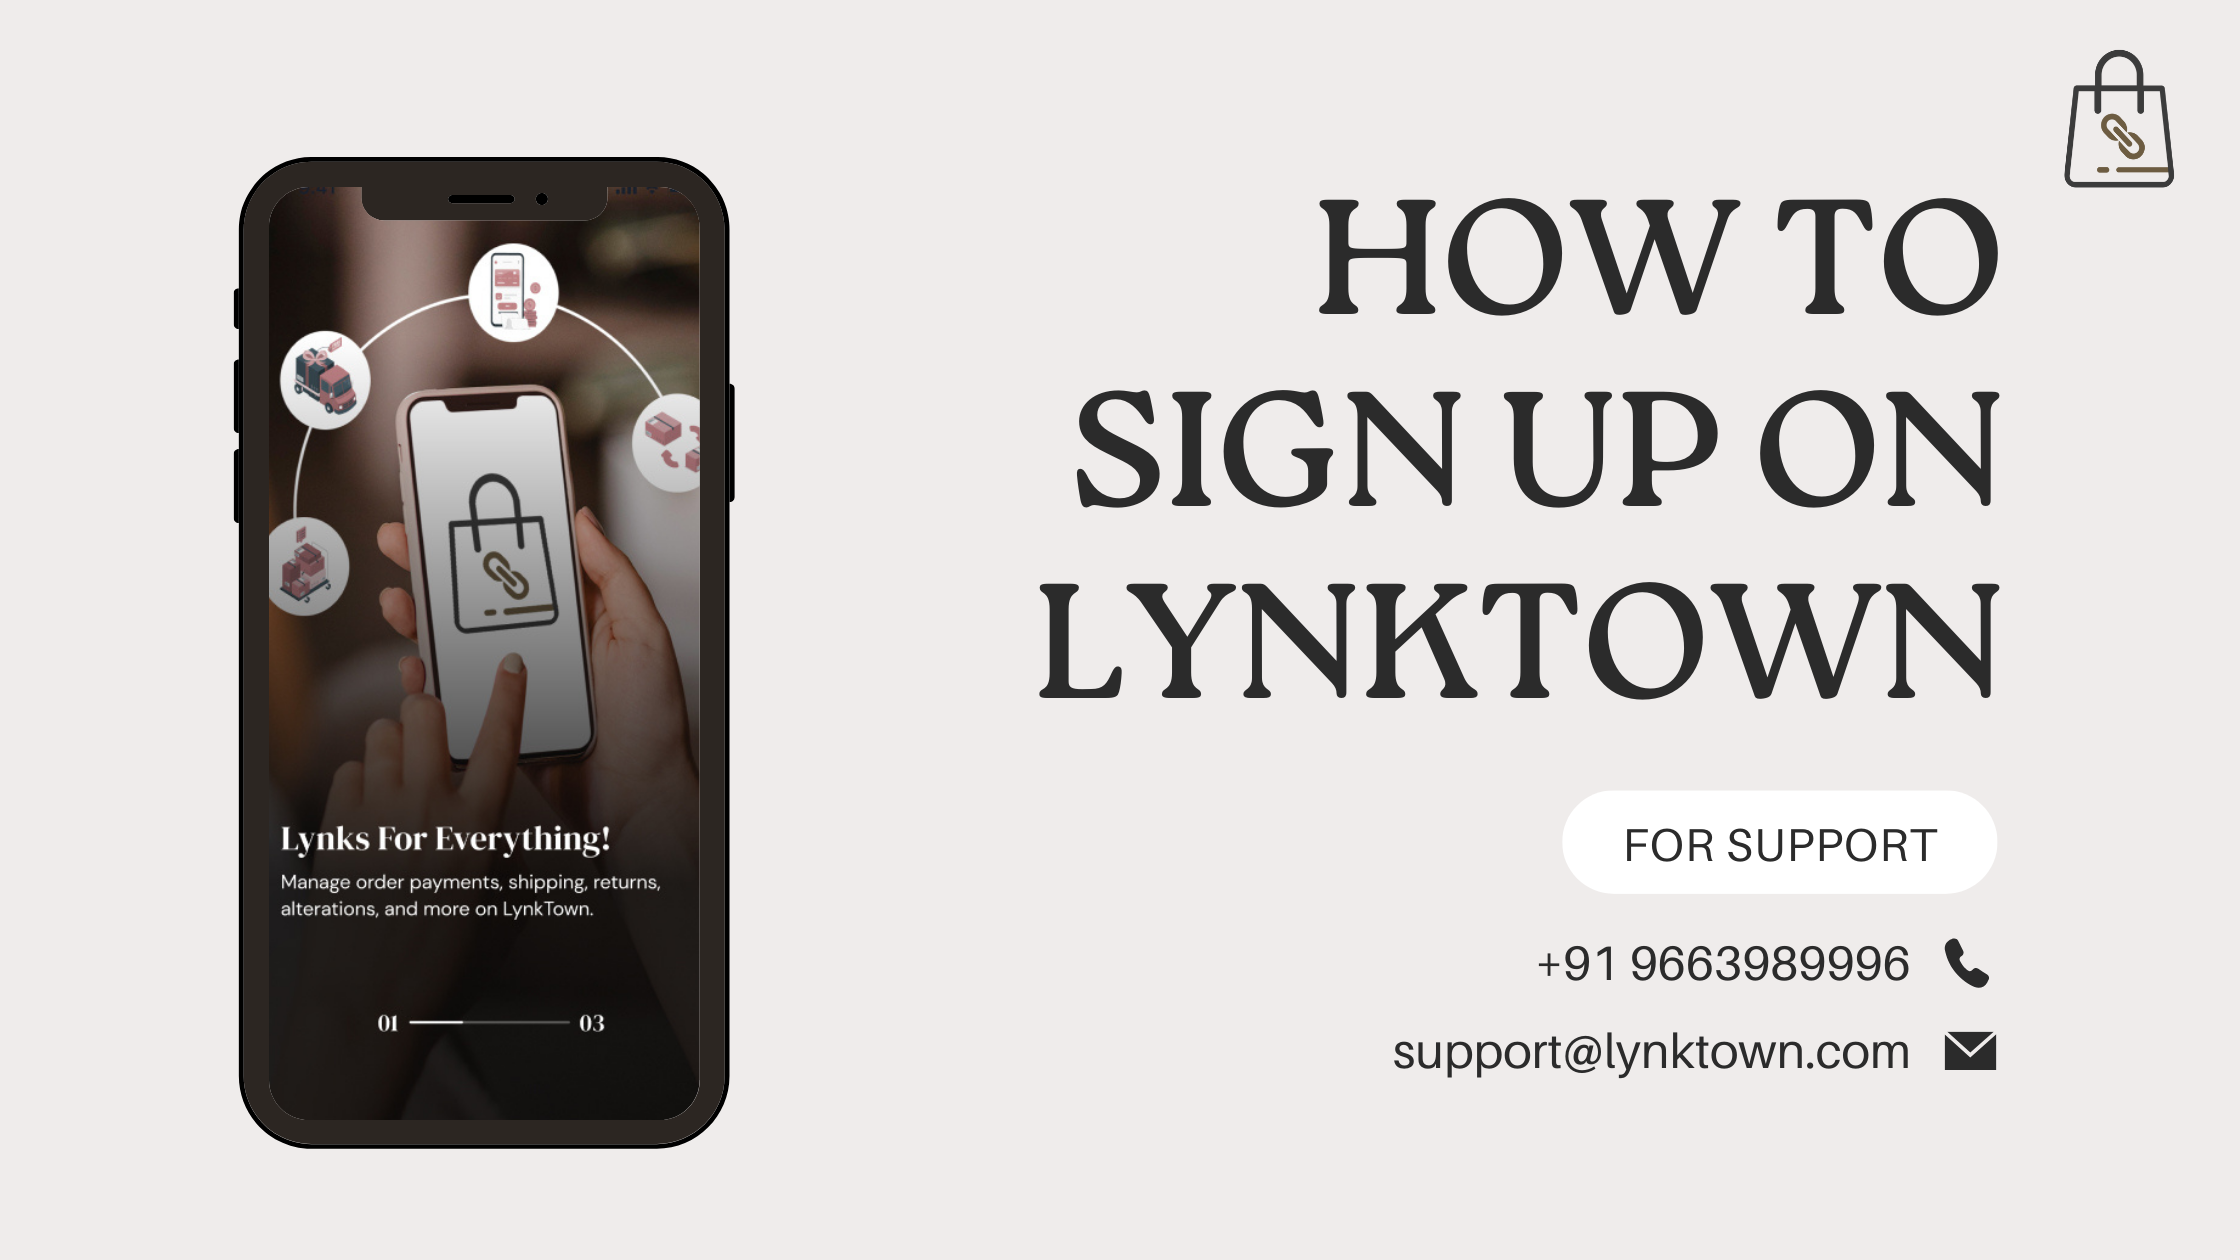 How to sign up for LynkTown and create a profile?